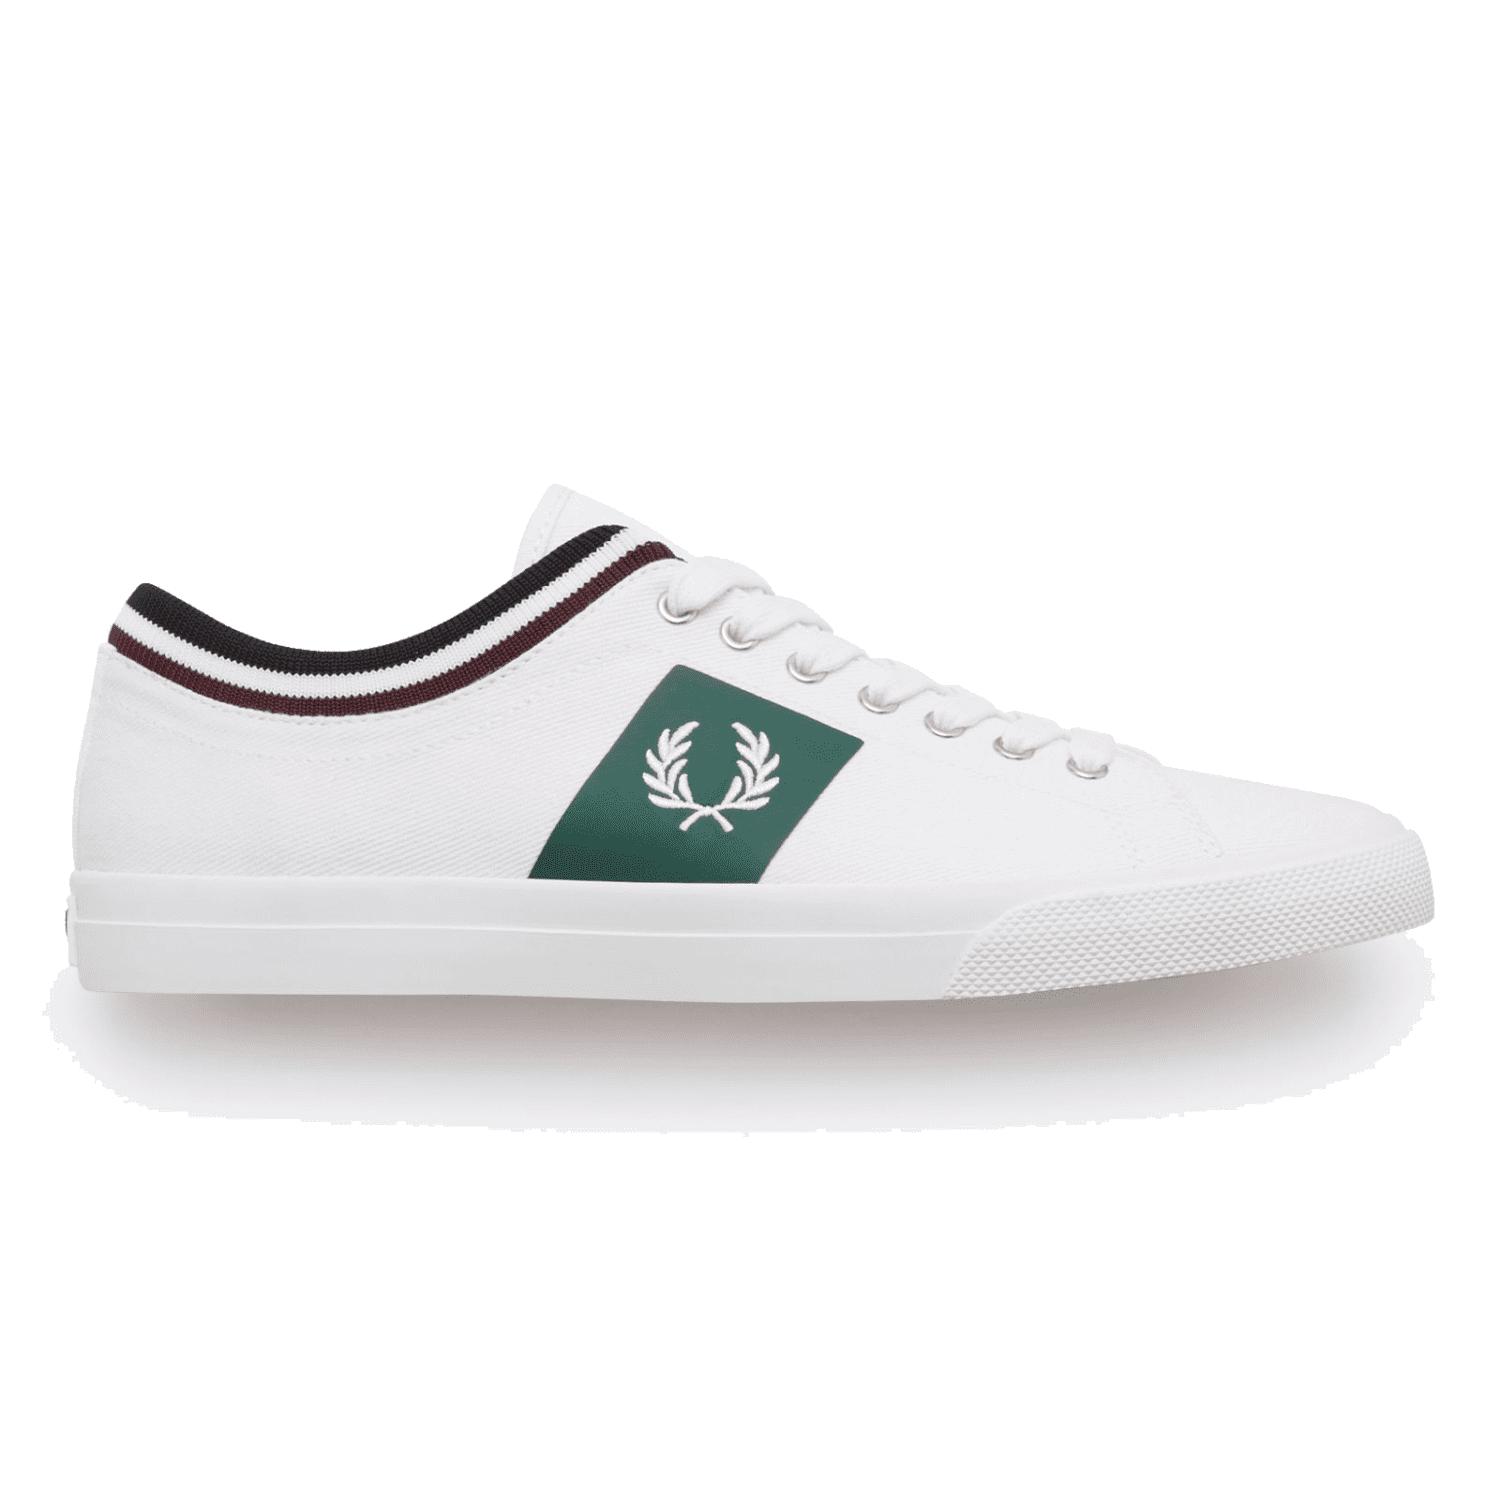 Fred Perry Underspin Tipped Cuff Twill White, Navy & Maroon for Men - Lyst